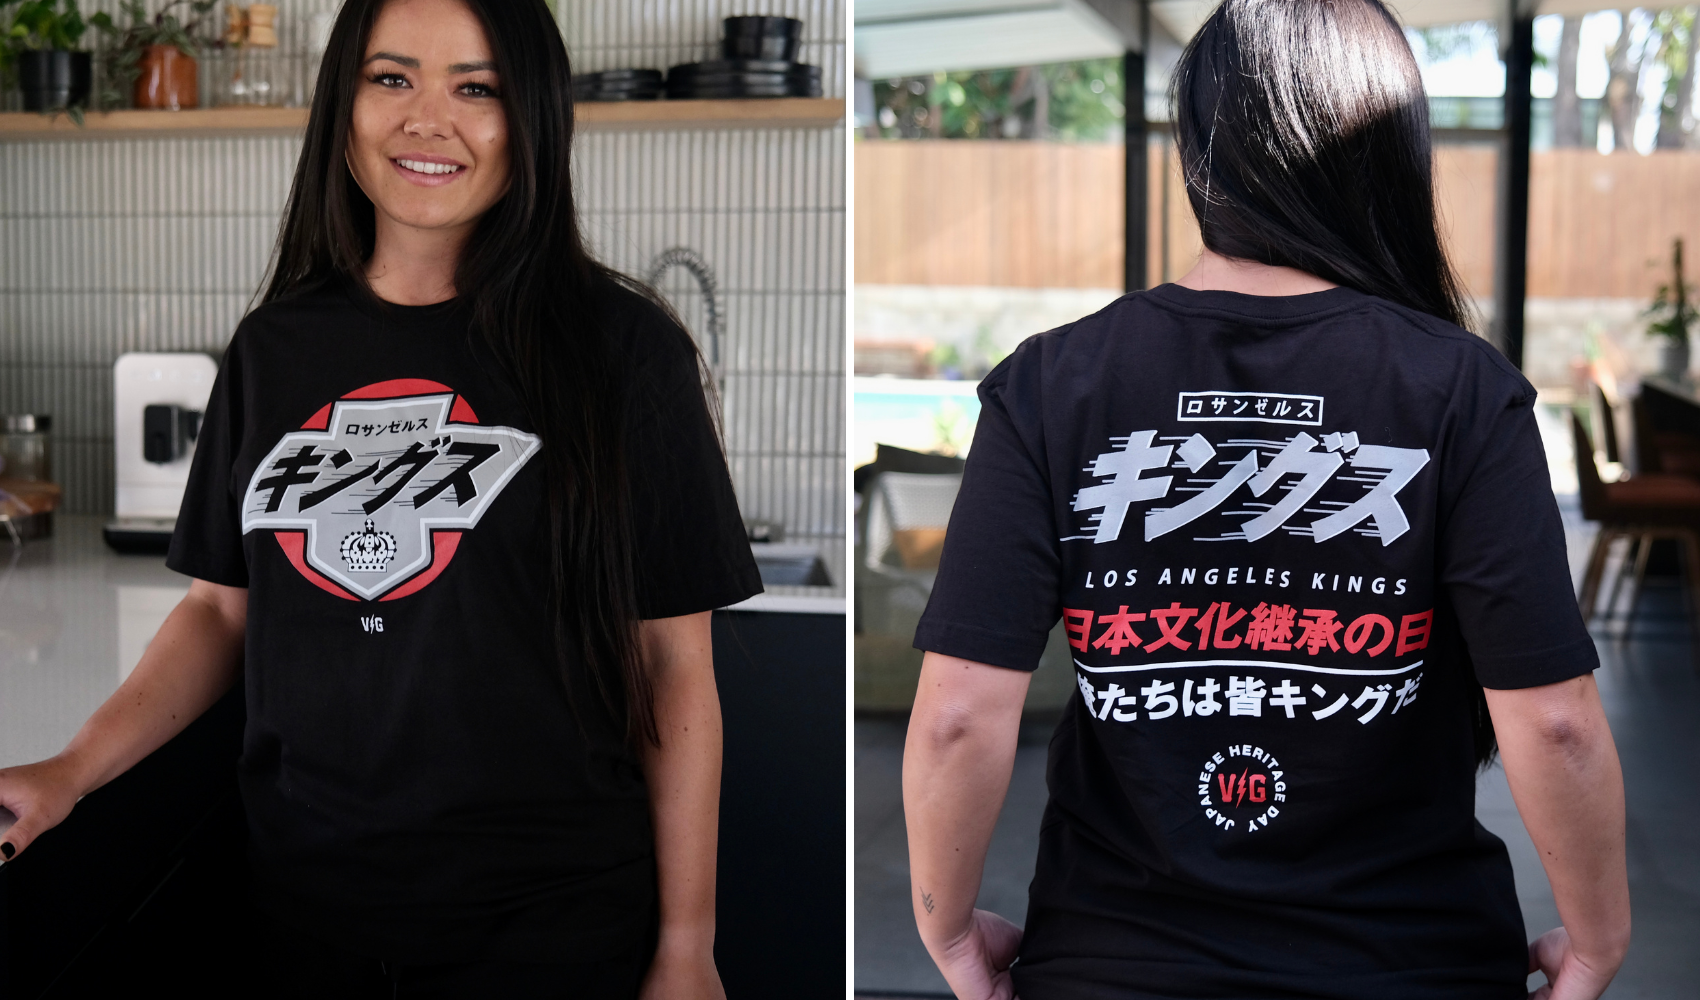 Lifetipsforbetterliving and the NHL Los Angeles Kings teamed up to create some special pieces for Japanese Heritage Night. The classic Kings 90’s heritage logo translated to Japanese sits on top of the red dot of the Rising Sun Flag. VG collaborated with Japanese language design experts at RuckingFotten to ensure a grammatically correct, beautiful piece of art.